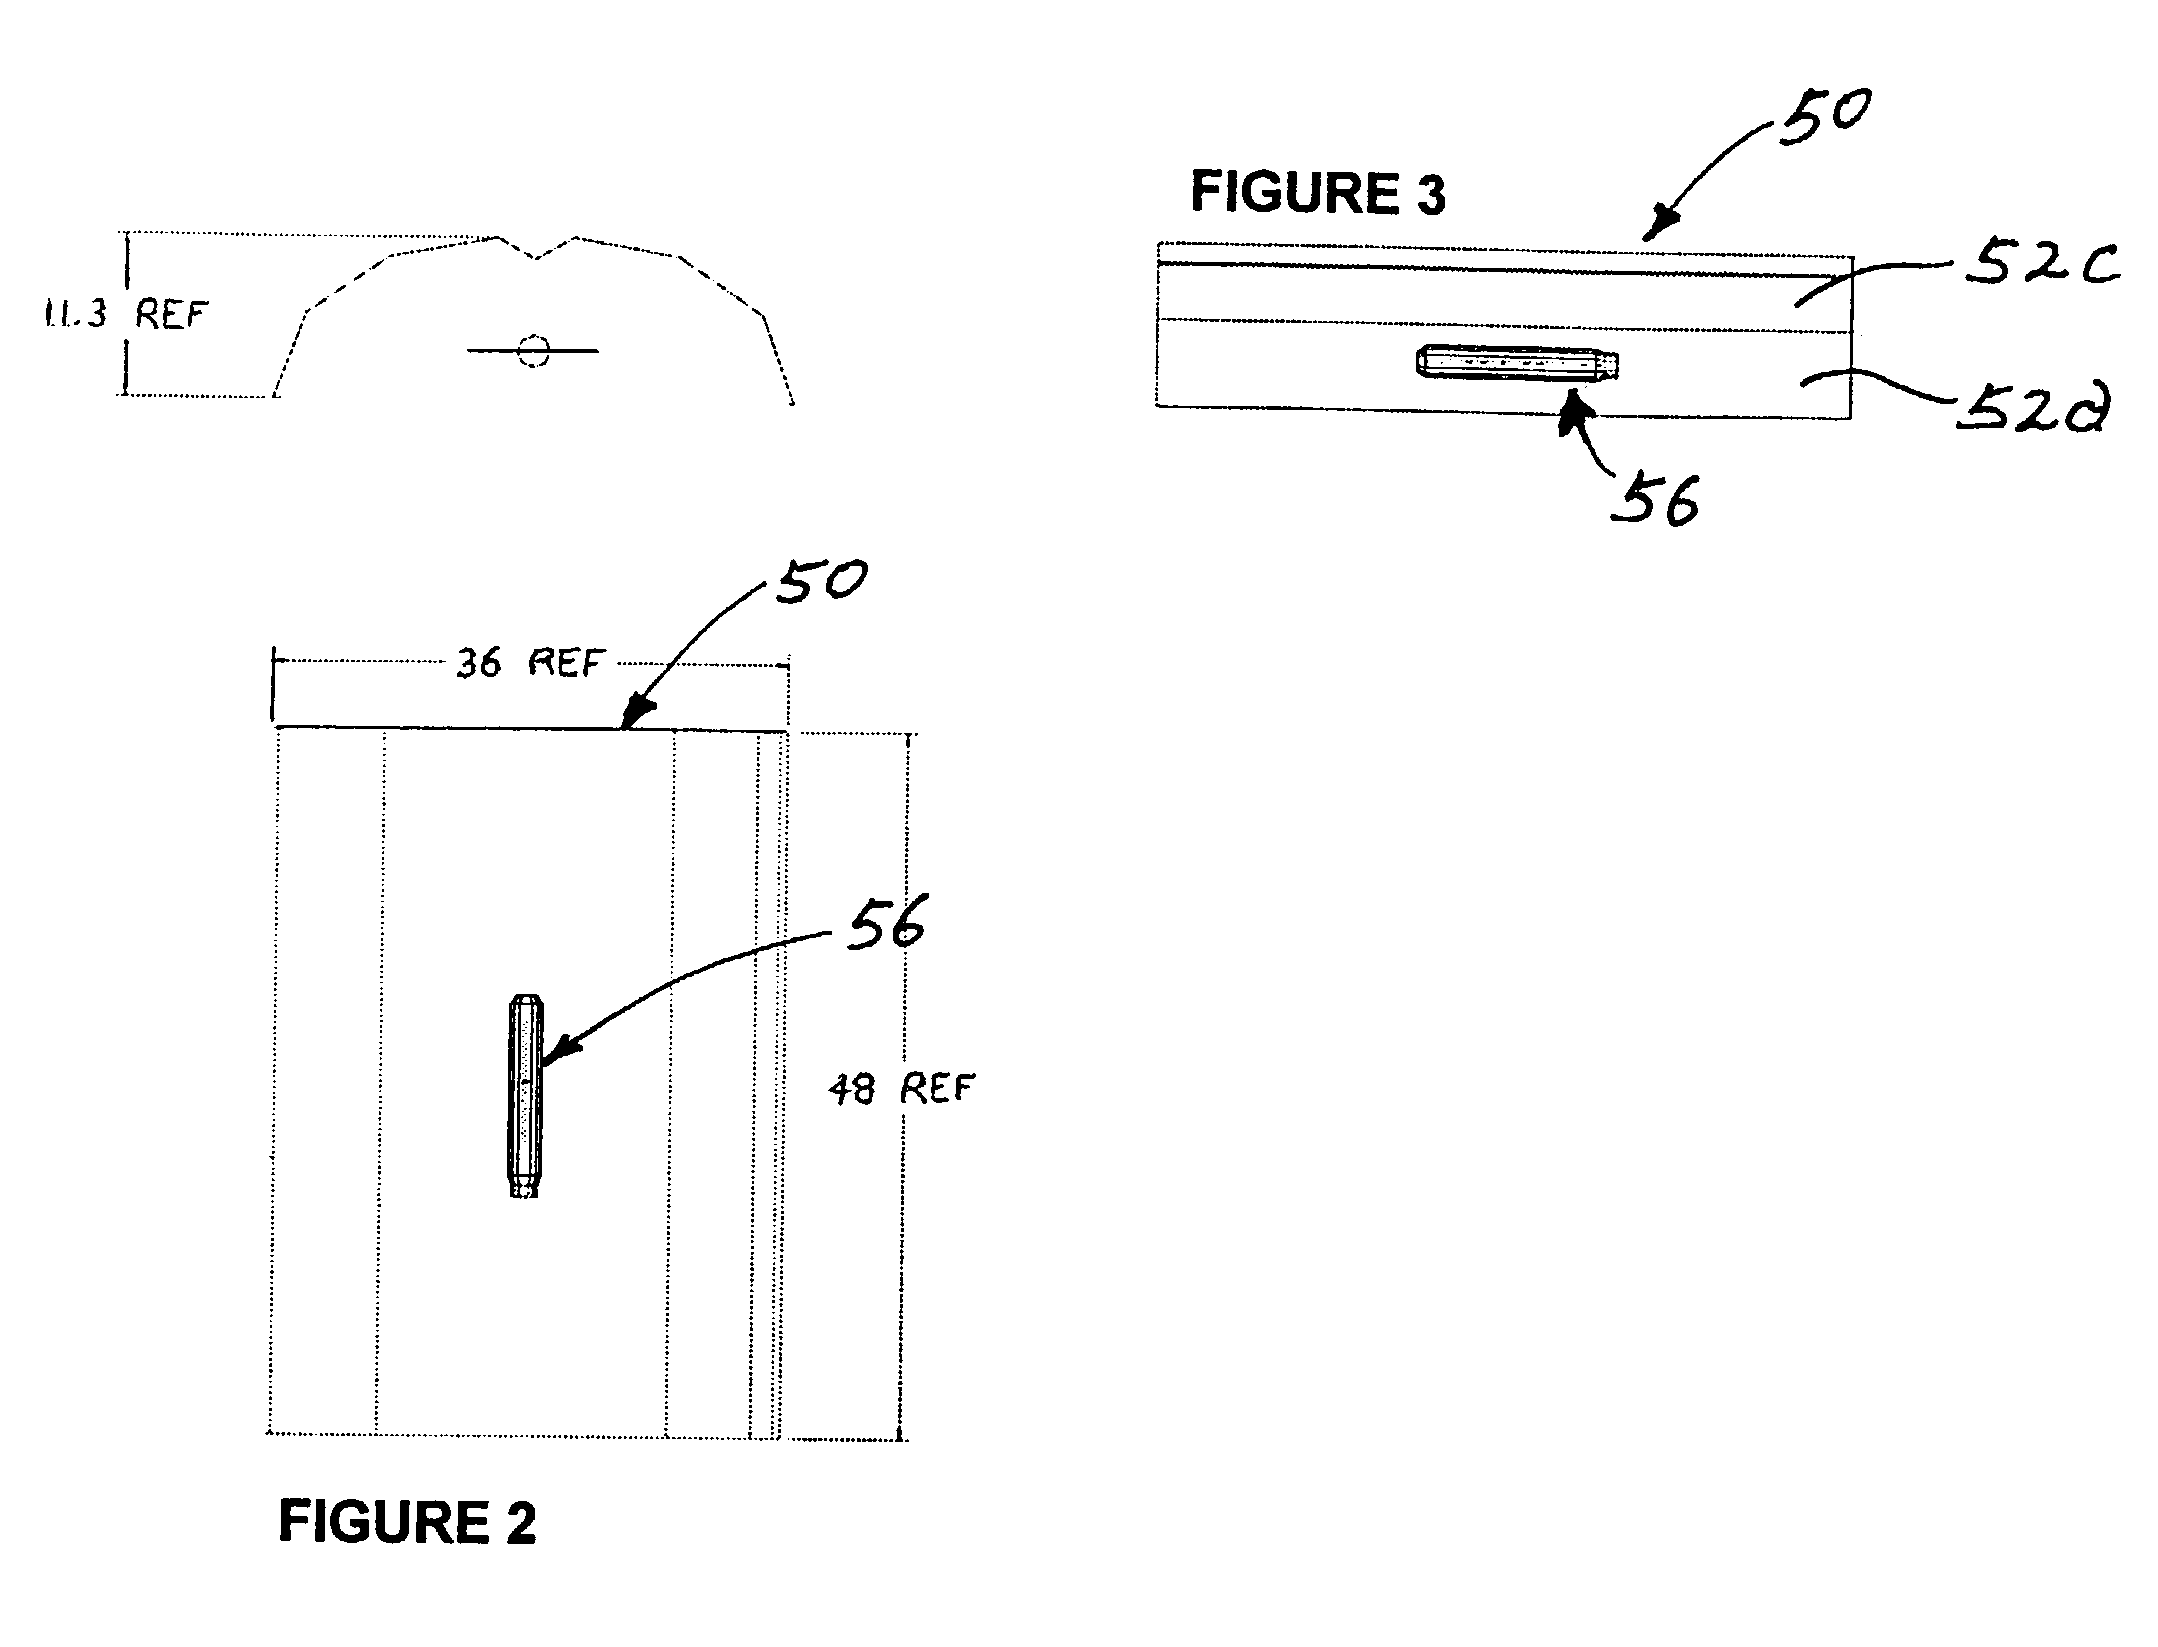 Energy efficient lighting apparatus and use thereof